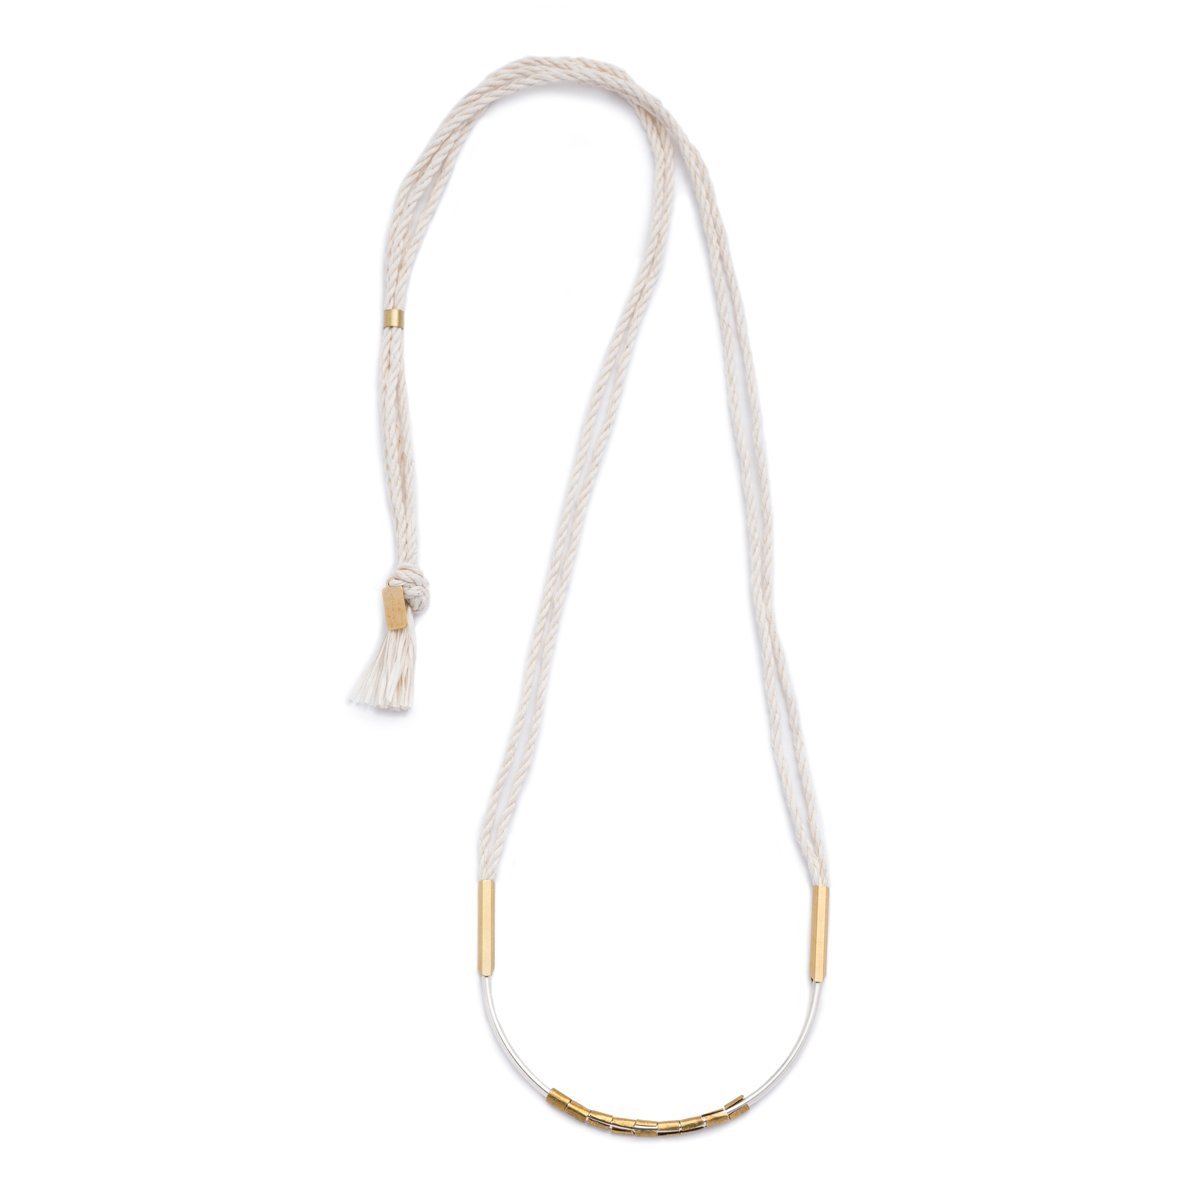 Lightweight, textural statement necklace, featuring cream-colored, hand-spun Japanese cotton rope, a curved, sterling silver focal point, African brass trade beads, and brass fittings. Hand-formed in Portland, Oregon. 